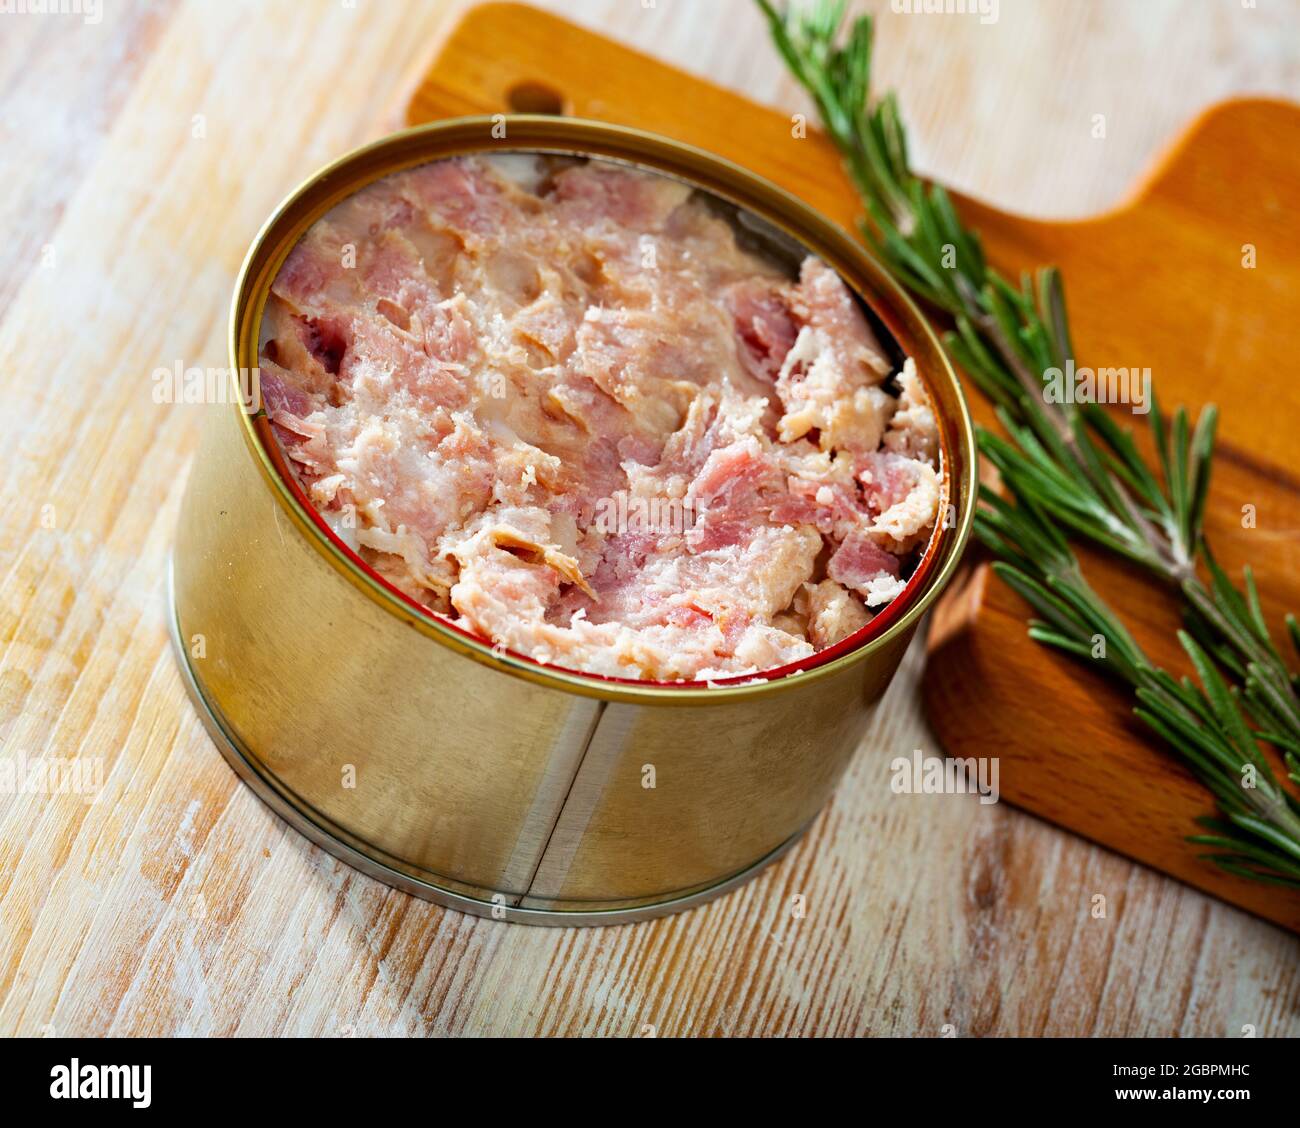 Preserved stewed meat on wooden table Stock Photo